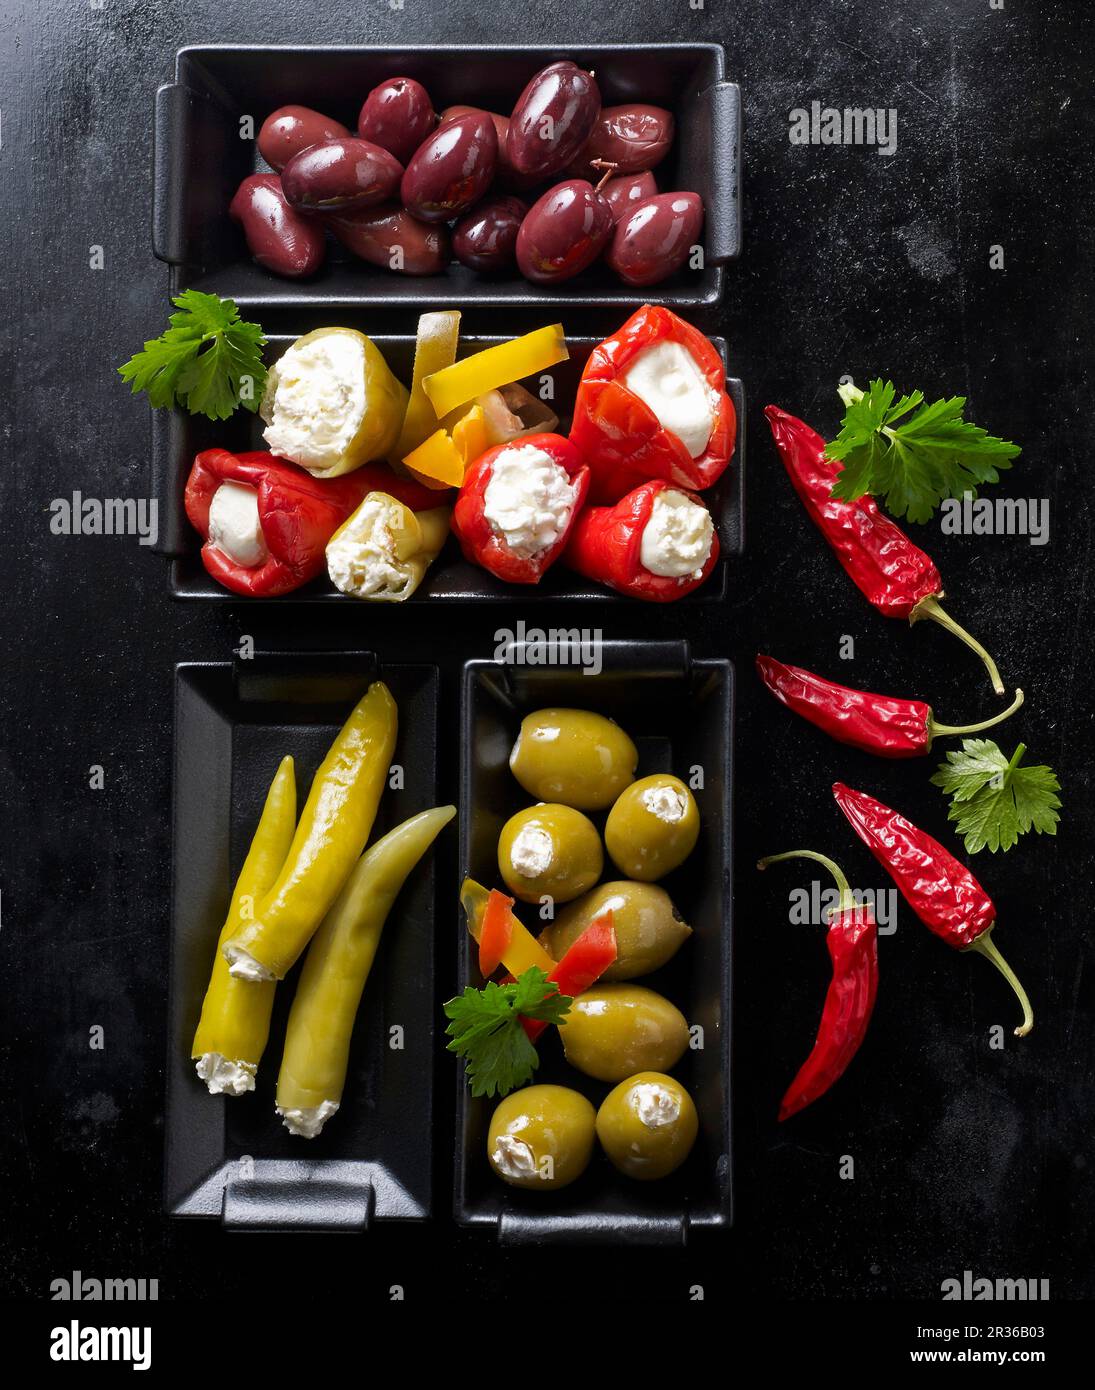 Various olives, stuffed mini peppers and jalapeños on a black baking tray Stock Photo